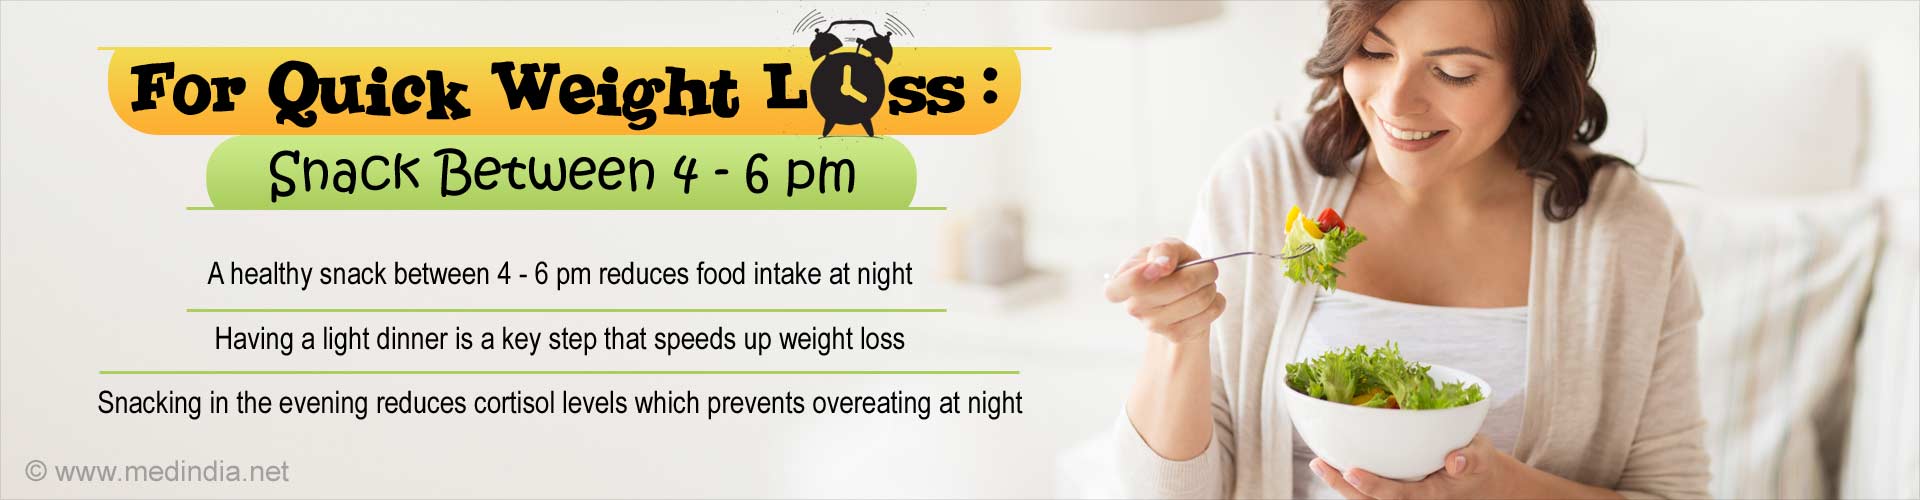 For quick weight loss snack between 4-6 pm
- A healthy snack between 4-6 pm reduces food intake at night
- having a light dinner is a key step that speeds up weight loss
- snacking in the evening reduces cortisol levels which prevents at overeating at night